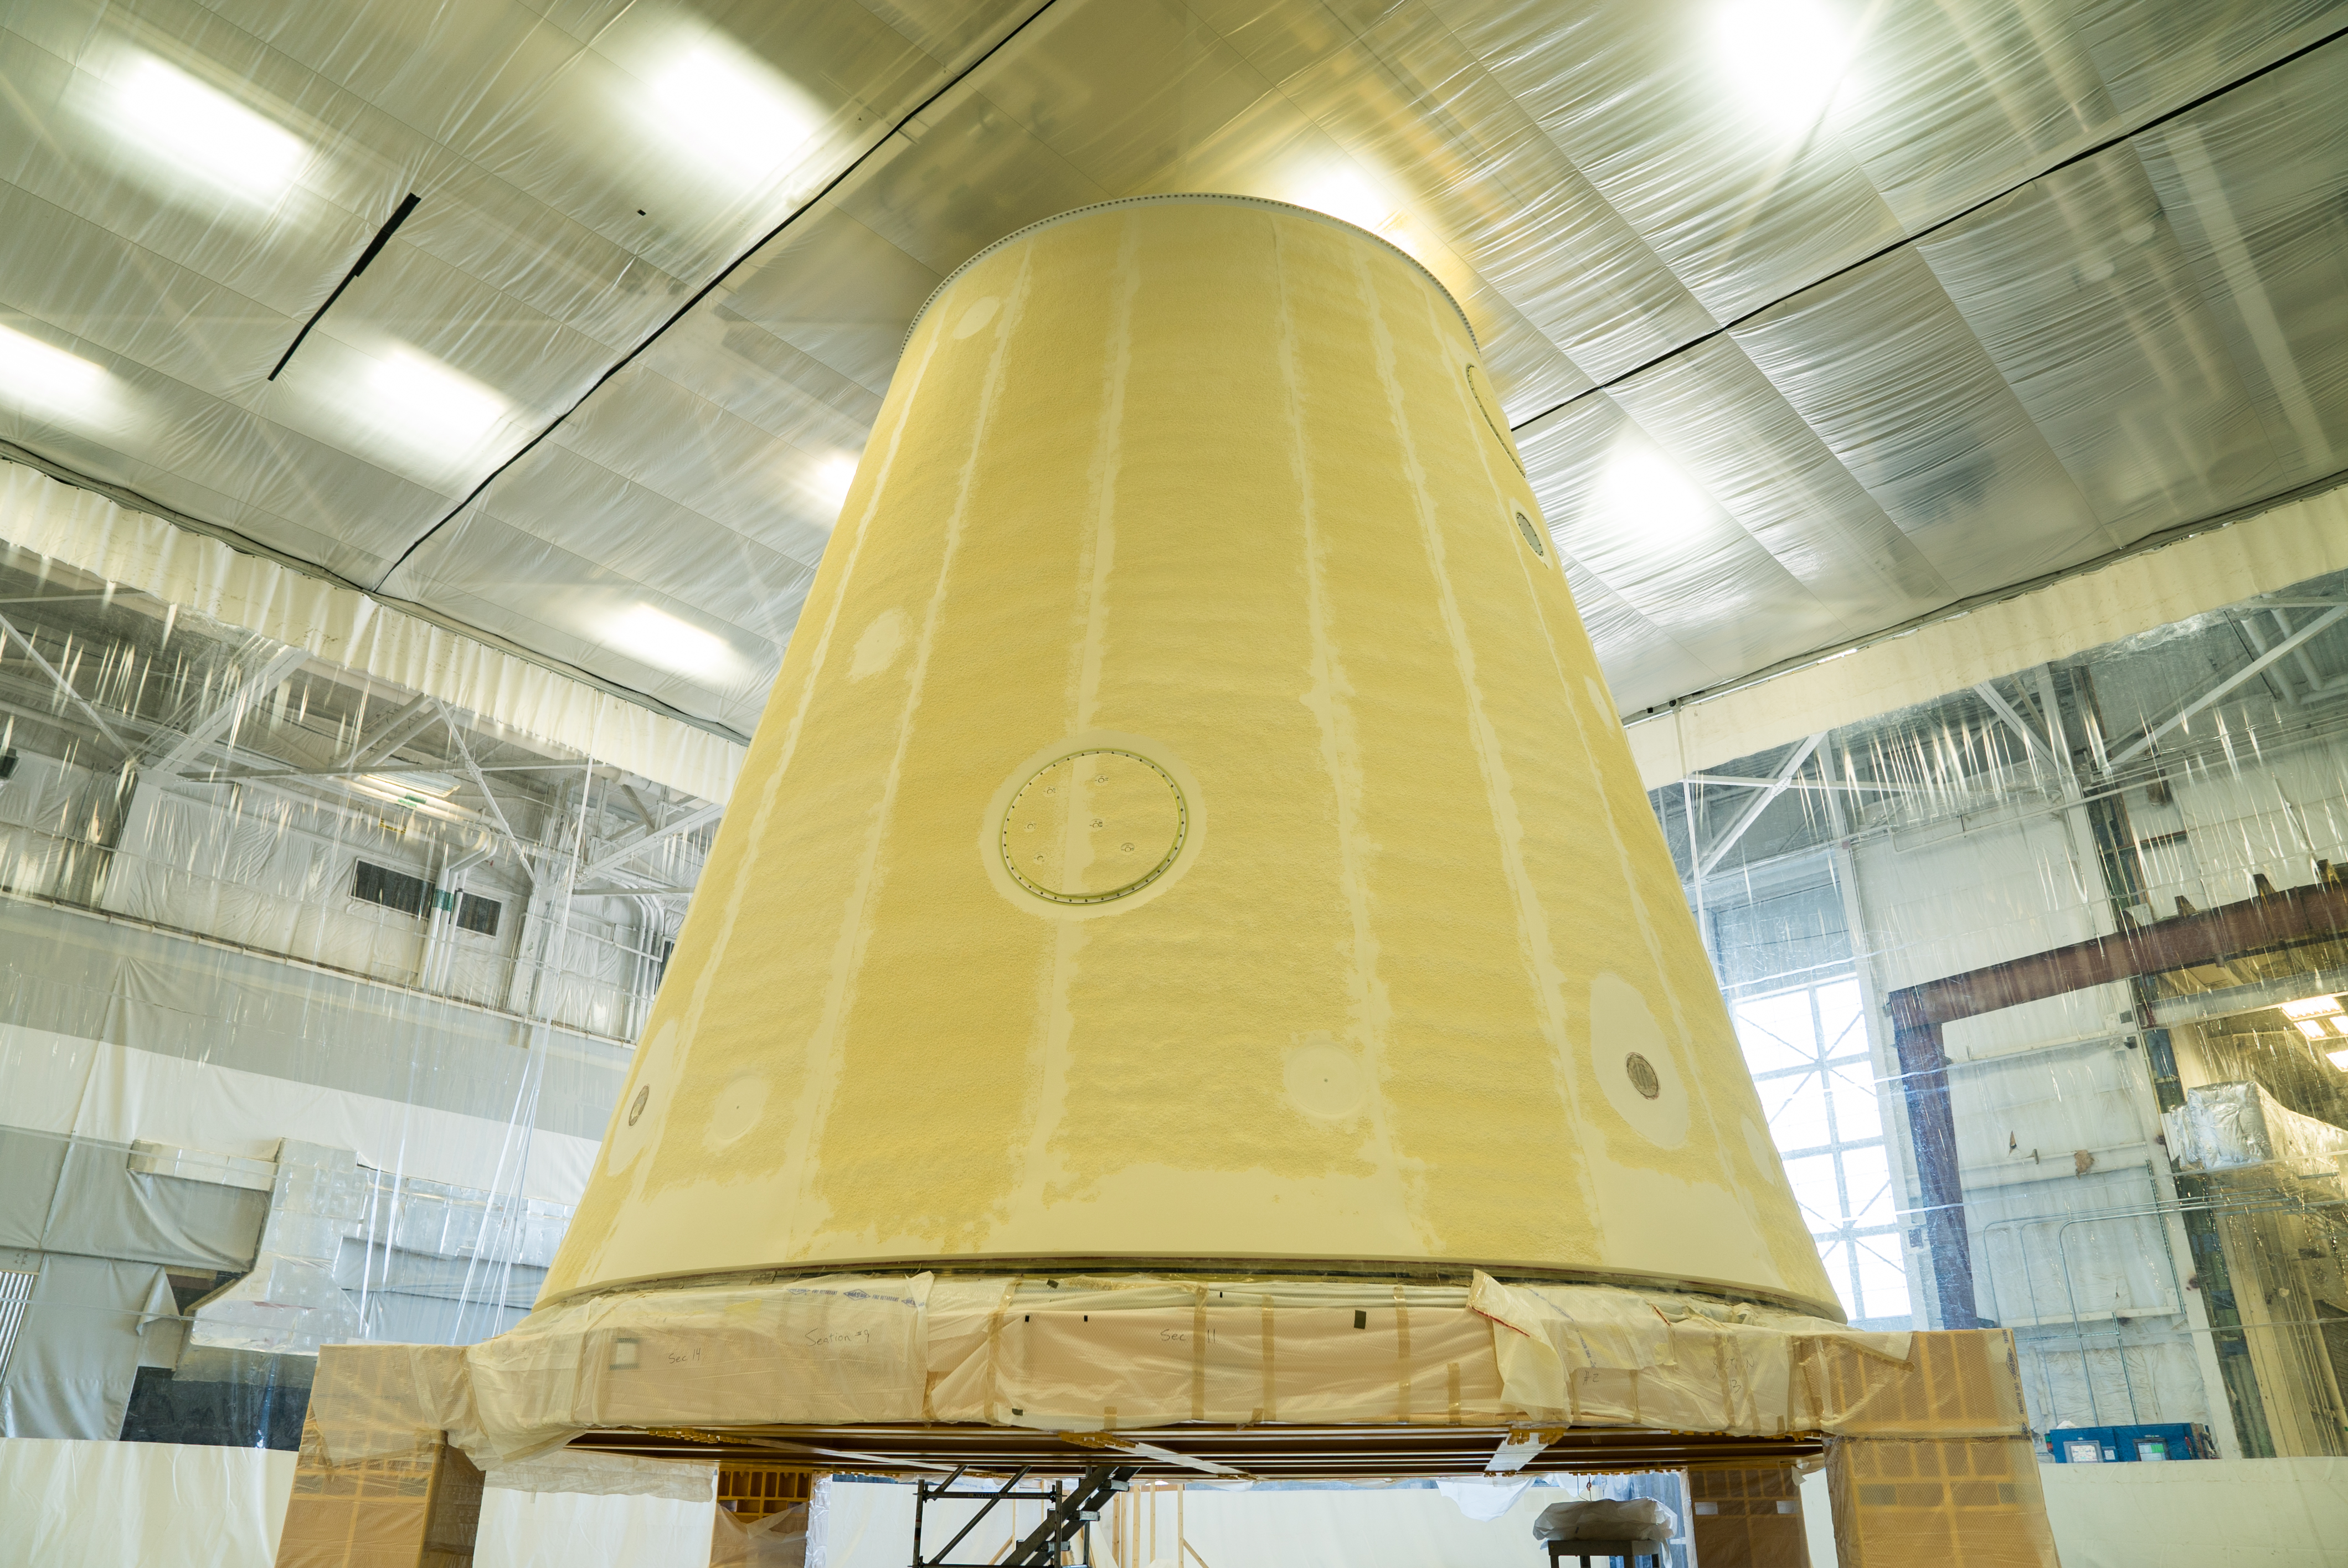 Thermal Insulation Protects the Space Launch System Rocket